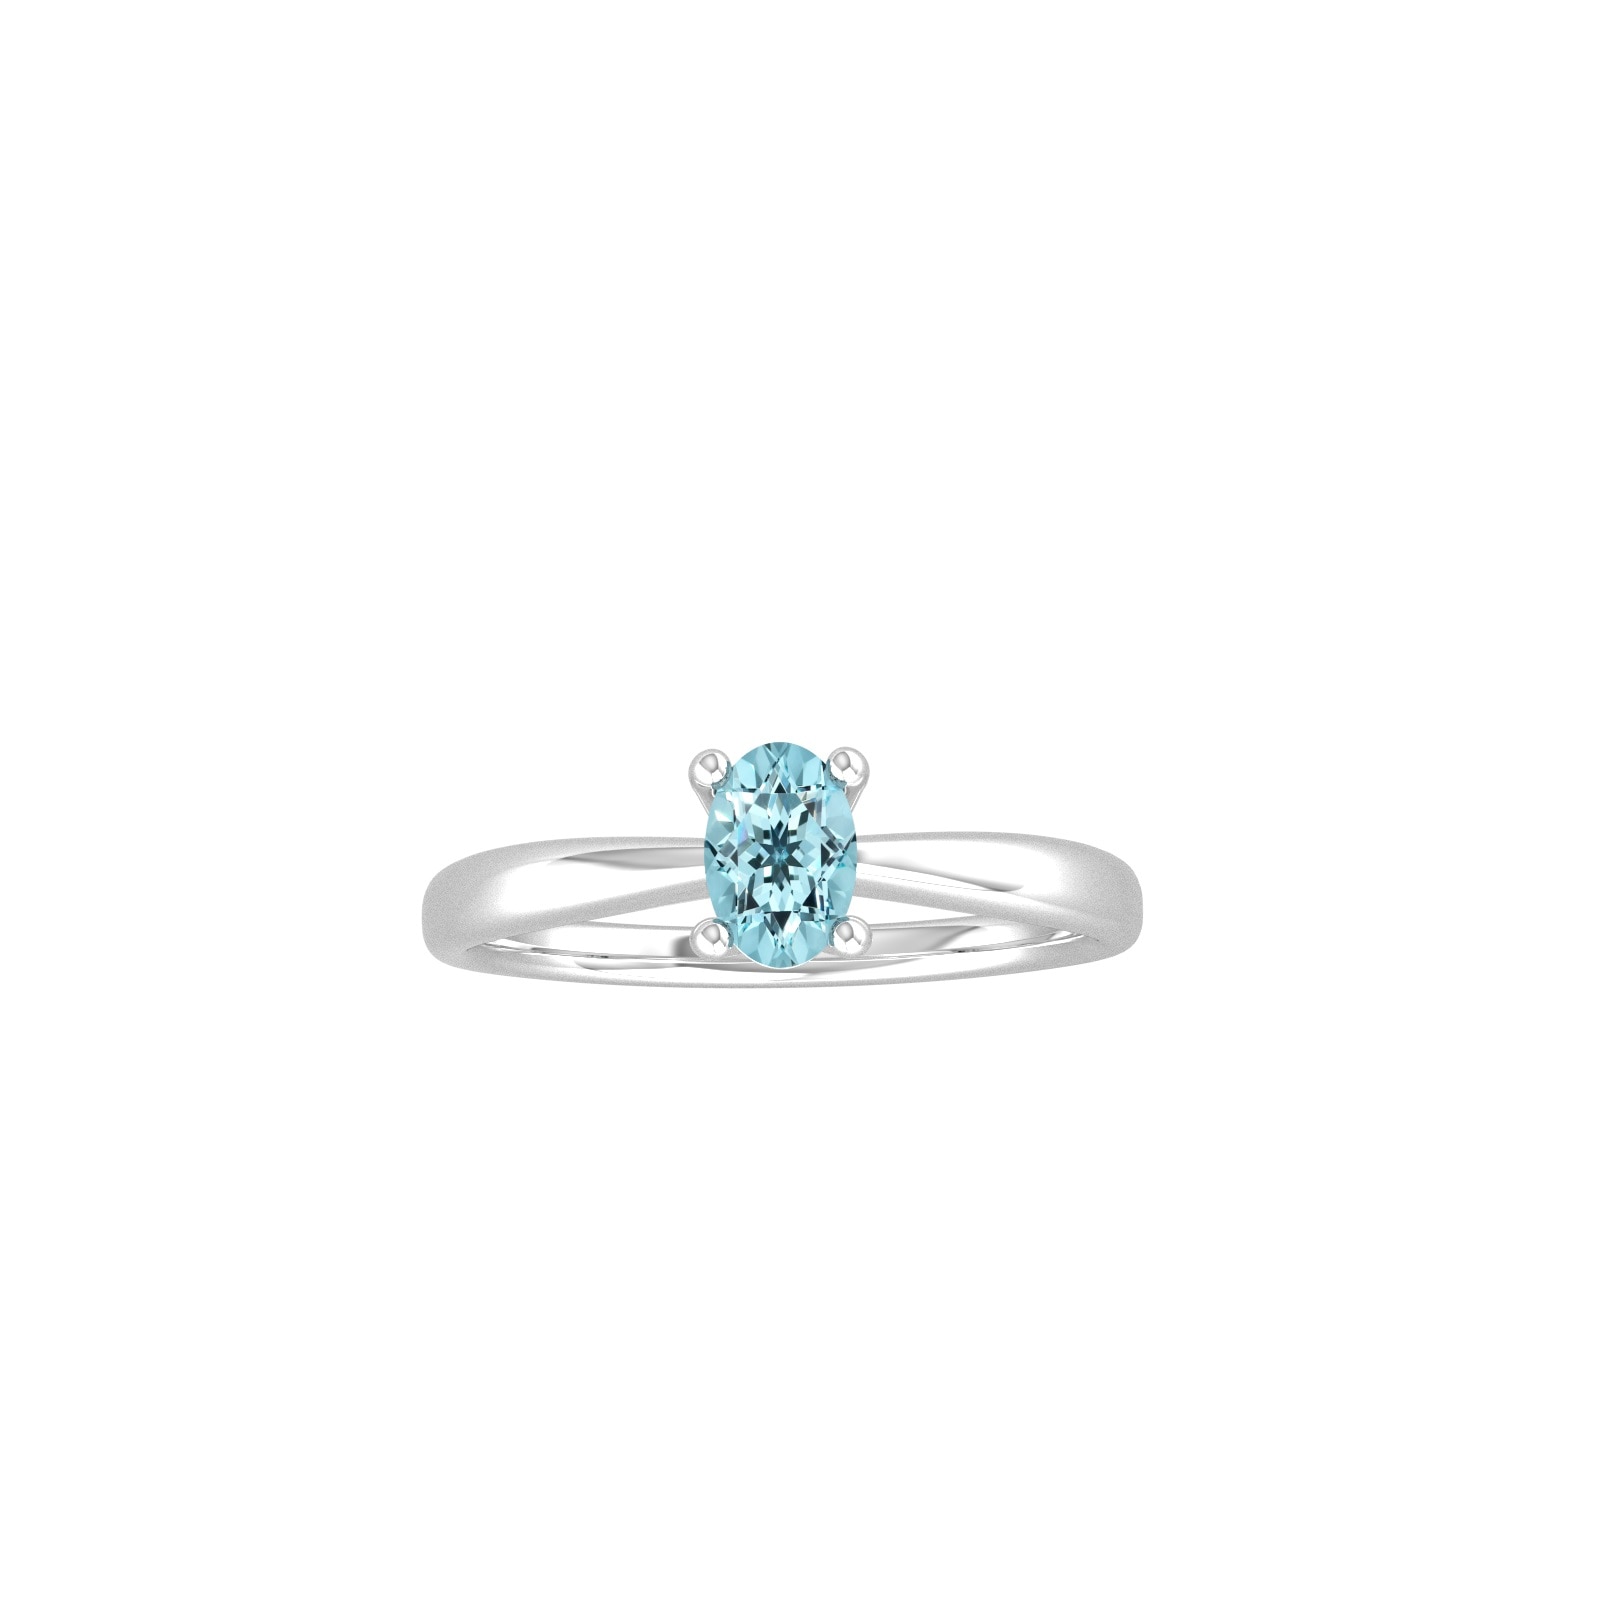 9ct White Gold 4 Claw Oval Aquamarine Ring